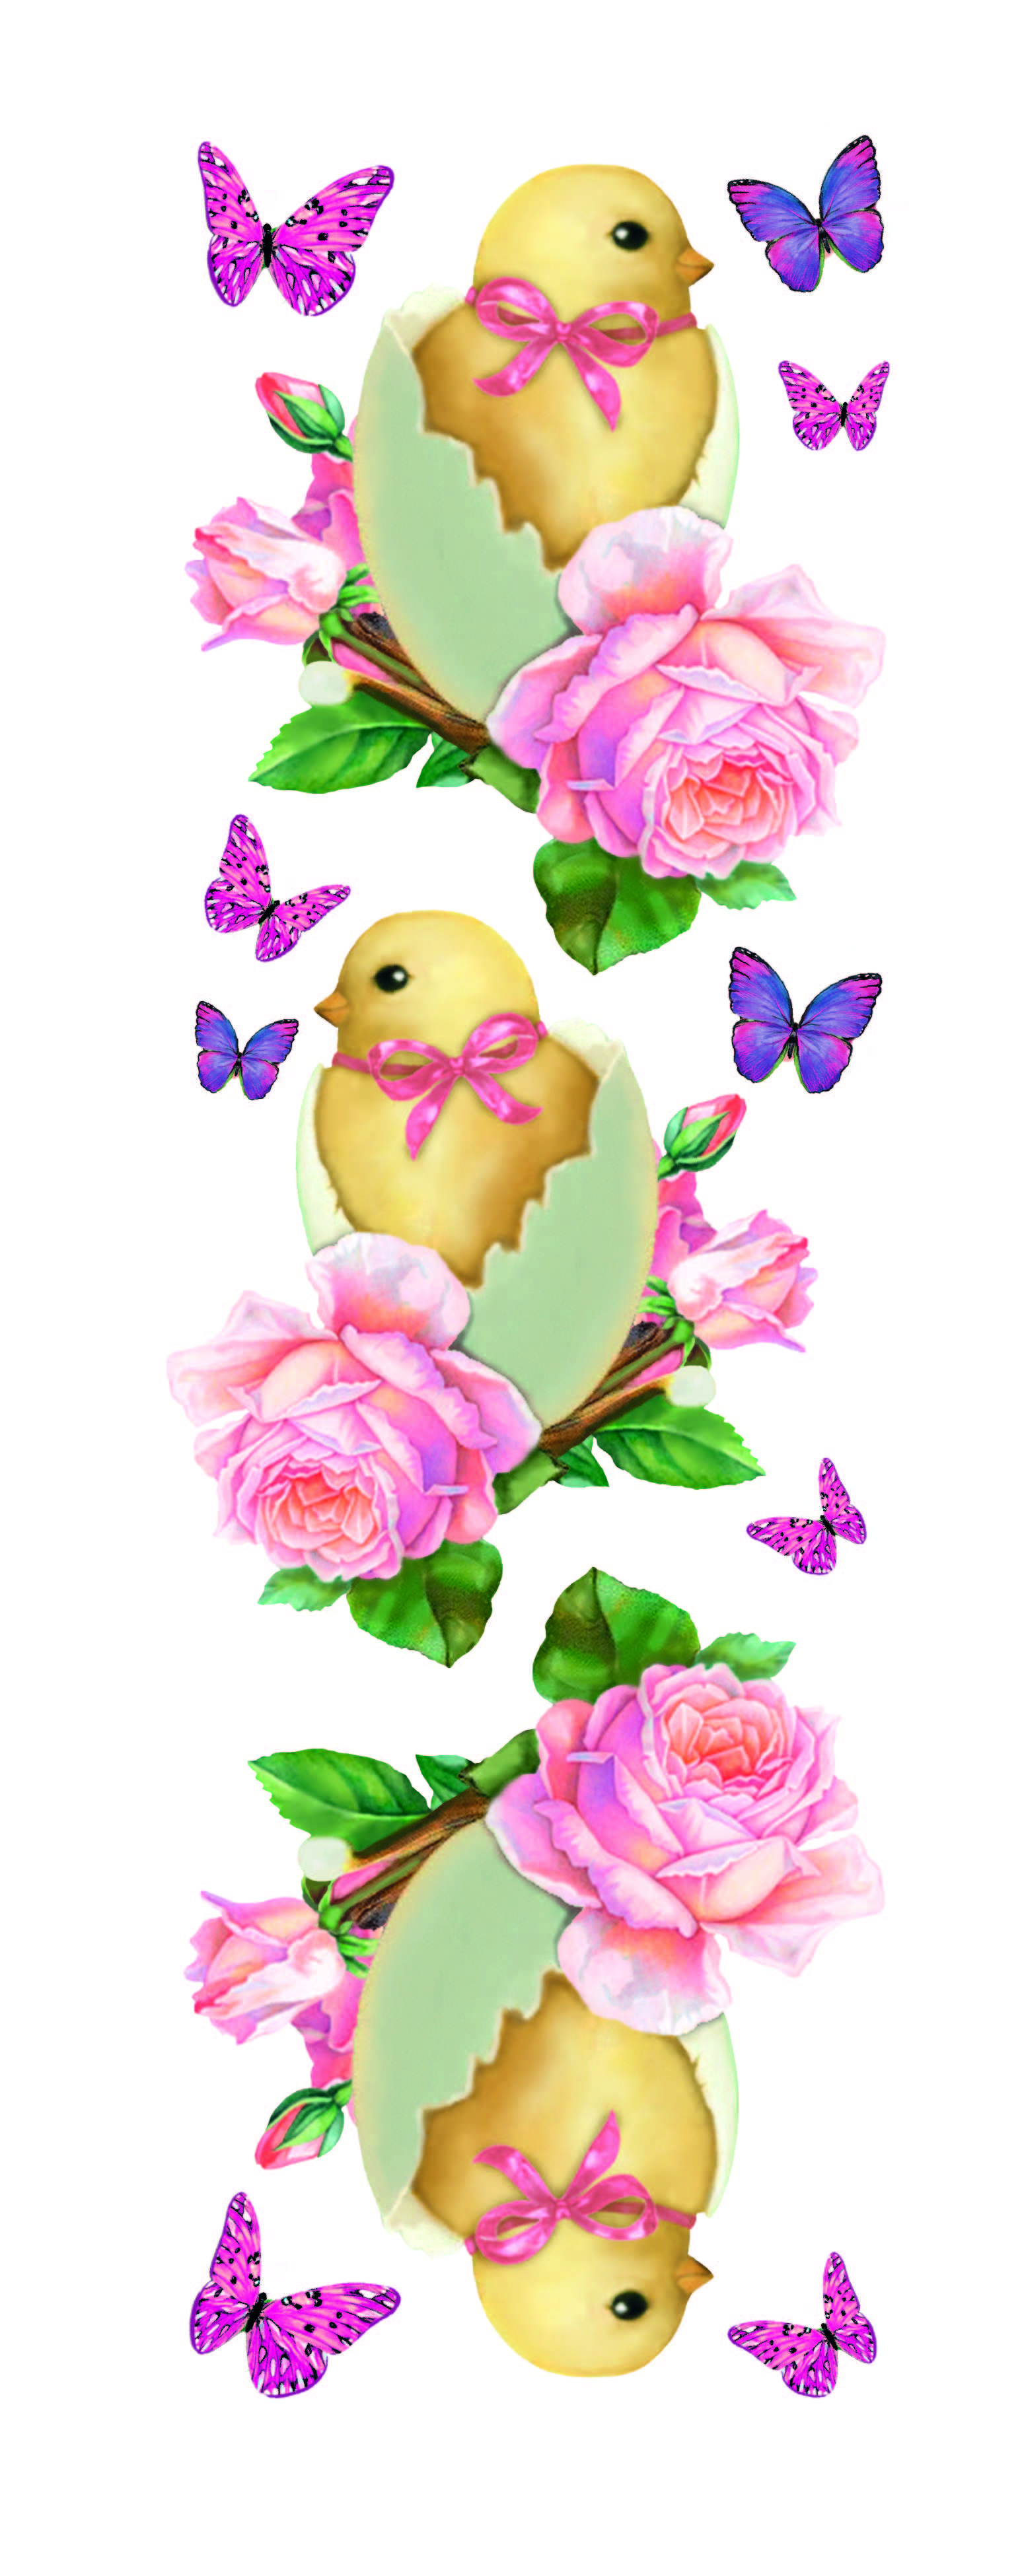 The Colorful Chick Sticker